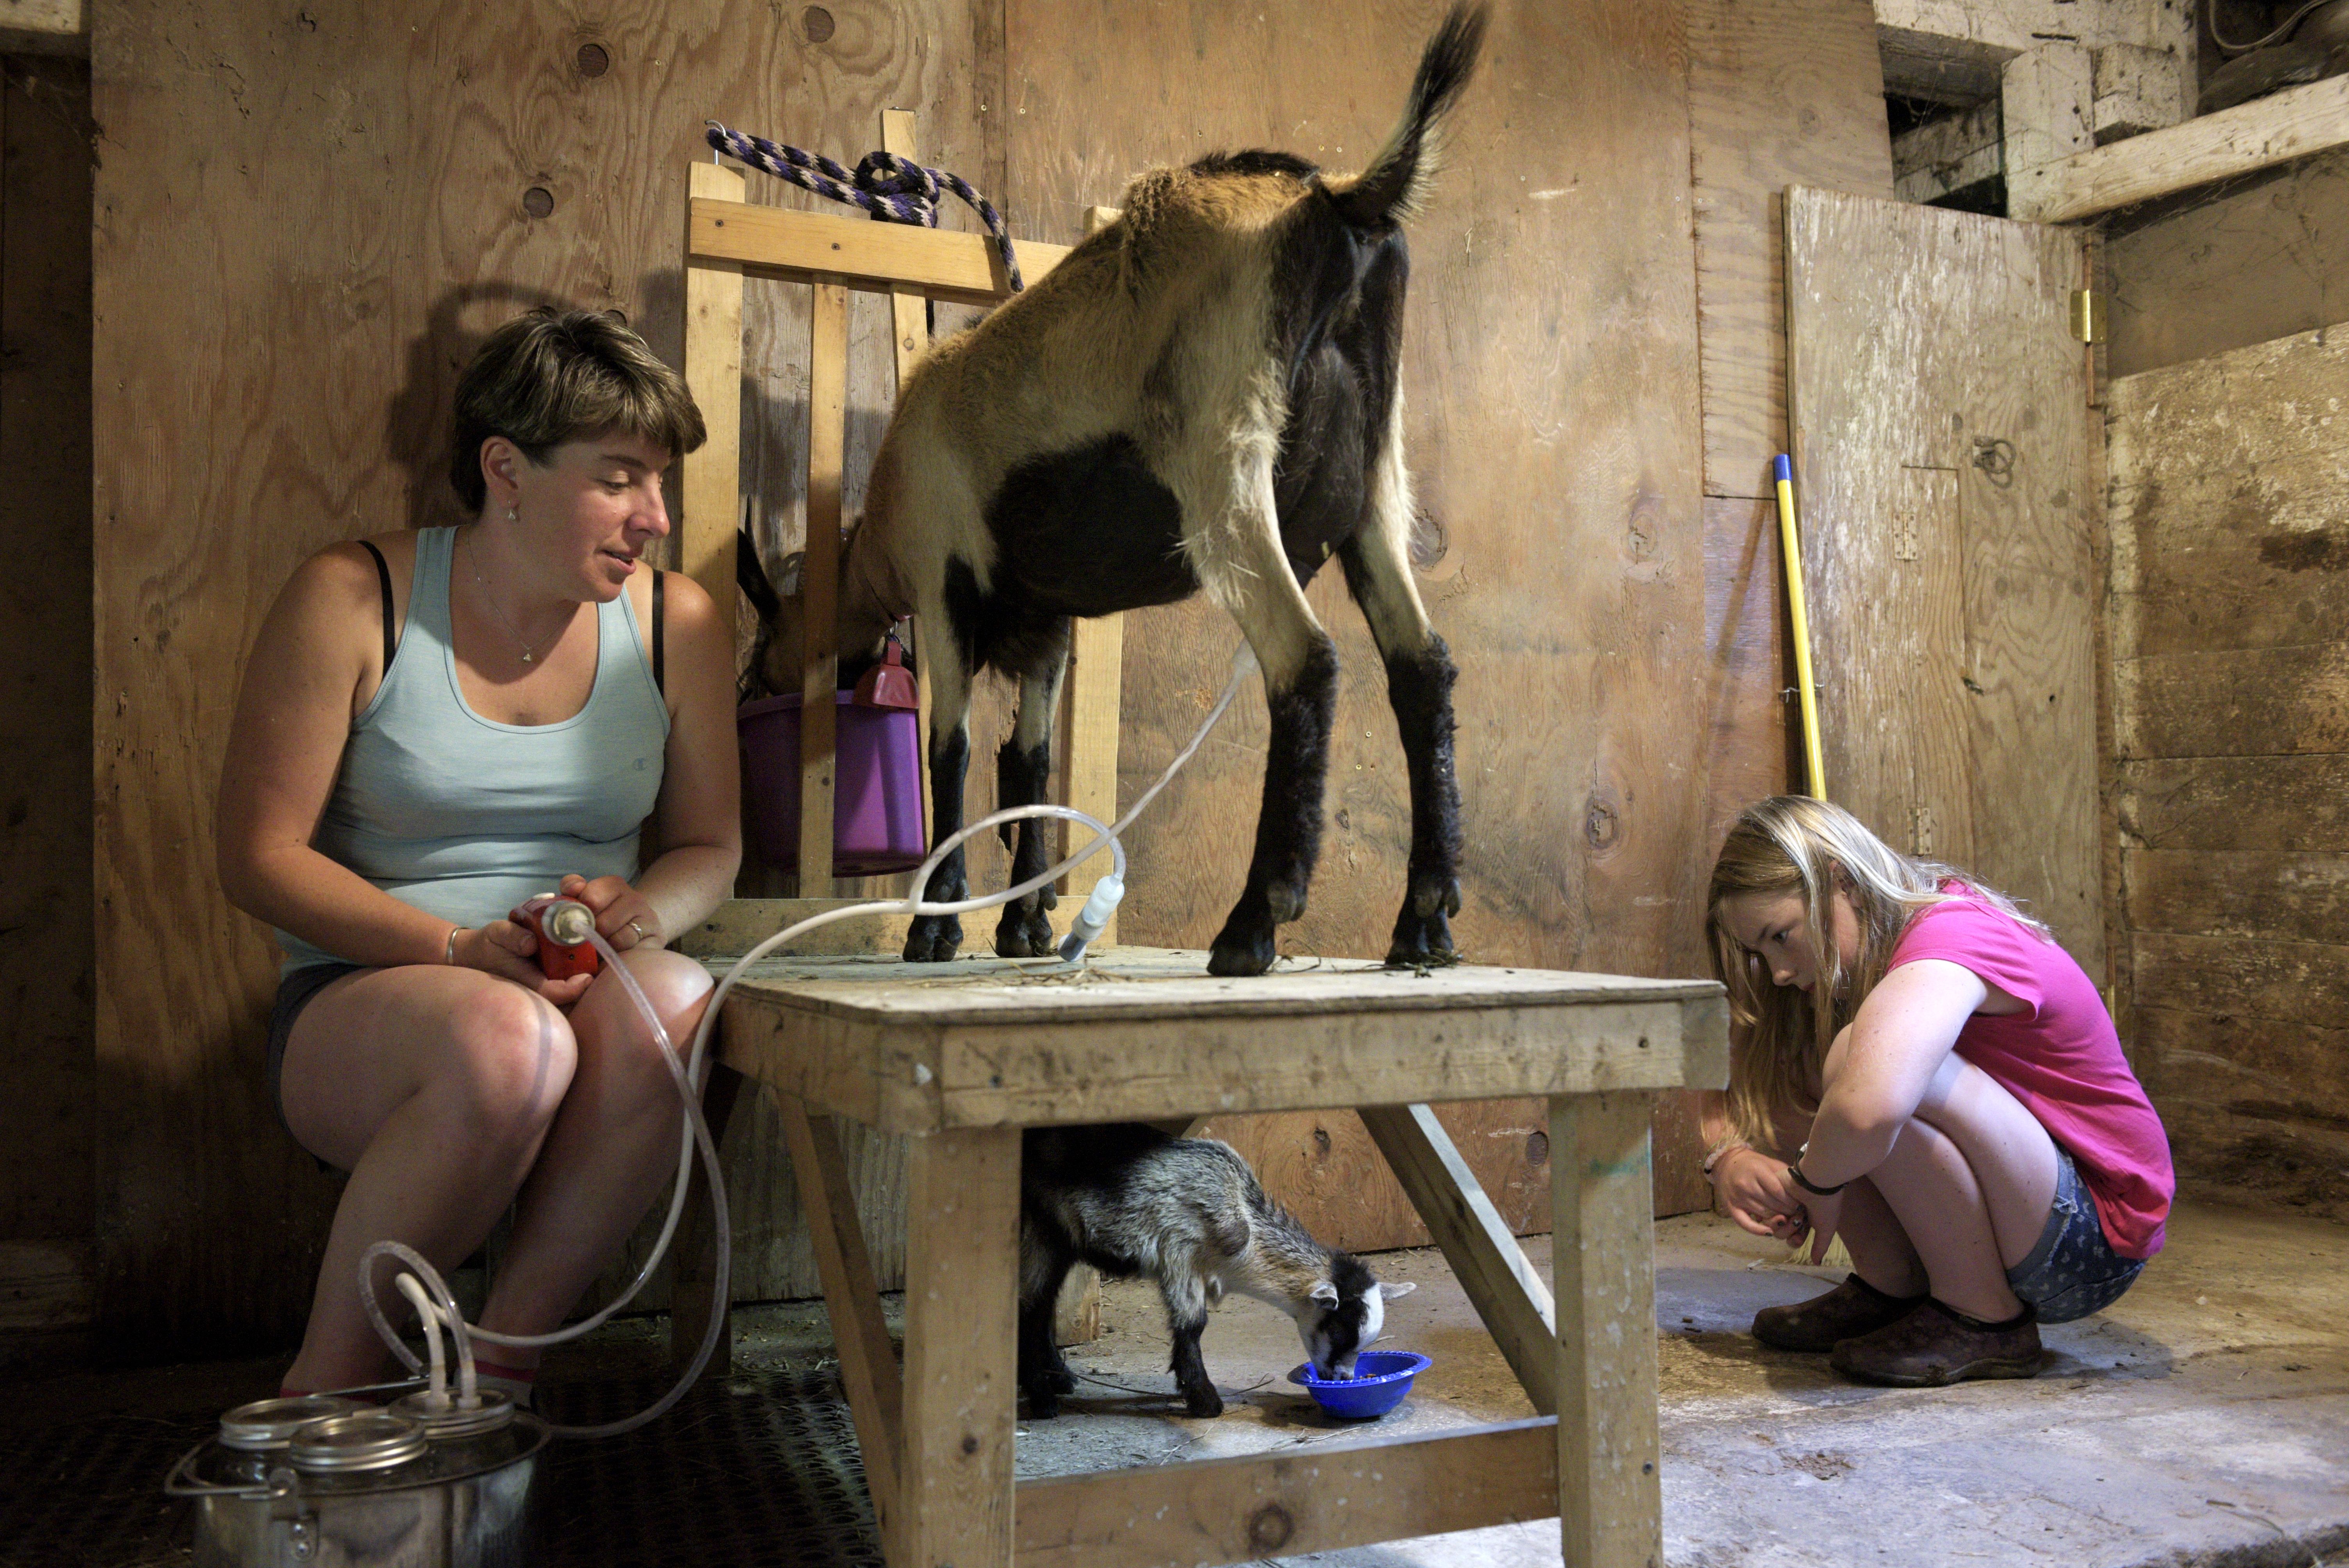 Tina Tuckerman, does her afternoon milking while her daughter Violet, 11, feeds an under weight kid at of One Chicken At A Time Farm in South Woodstock, Vt., Tuesday, July 12, 2016. Tuckerman started making soap with the milk about eight years ago. "That's when my husband said, 'you've got to do something with all these goats,'" said Tuckerman.  (Valley News - James M. Patterson) Copyright Valley News. May not be reprinted or used online without permission. Send requests to permission@vnews.com.